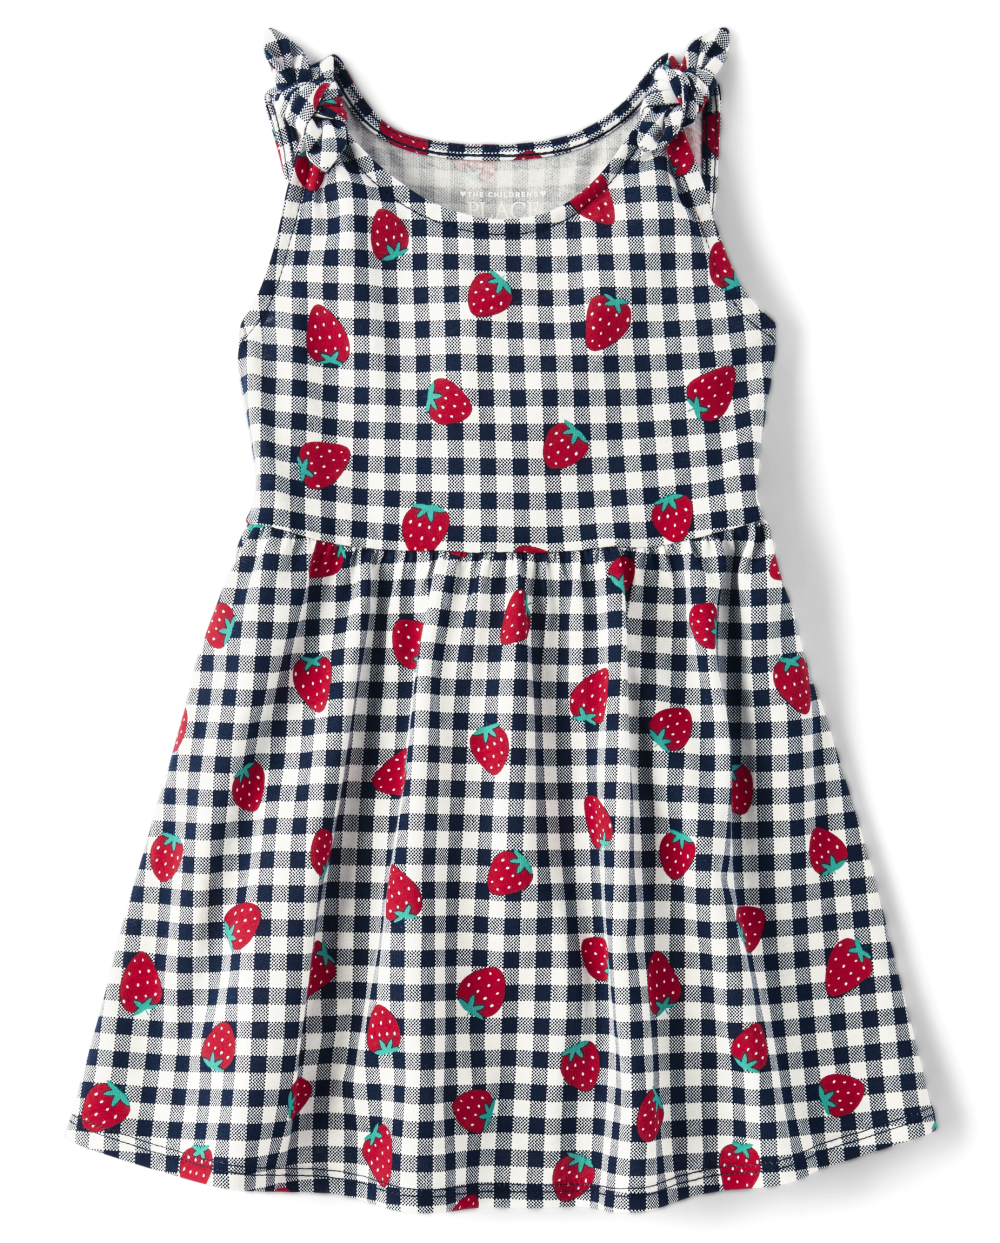 Toddler Baby Checkered Gingham Print Sleeveless Above the Knee Scoop Neck Dress